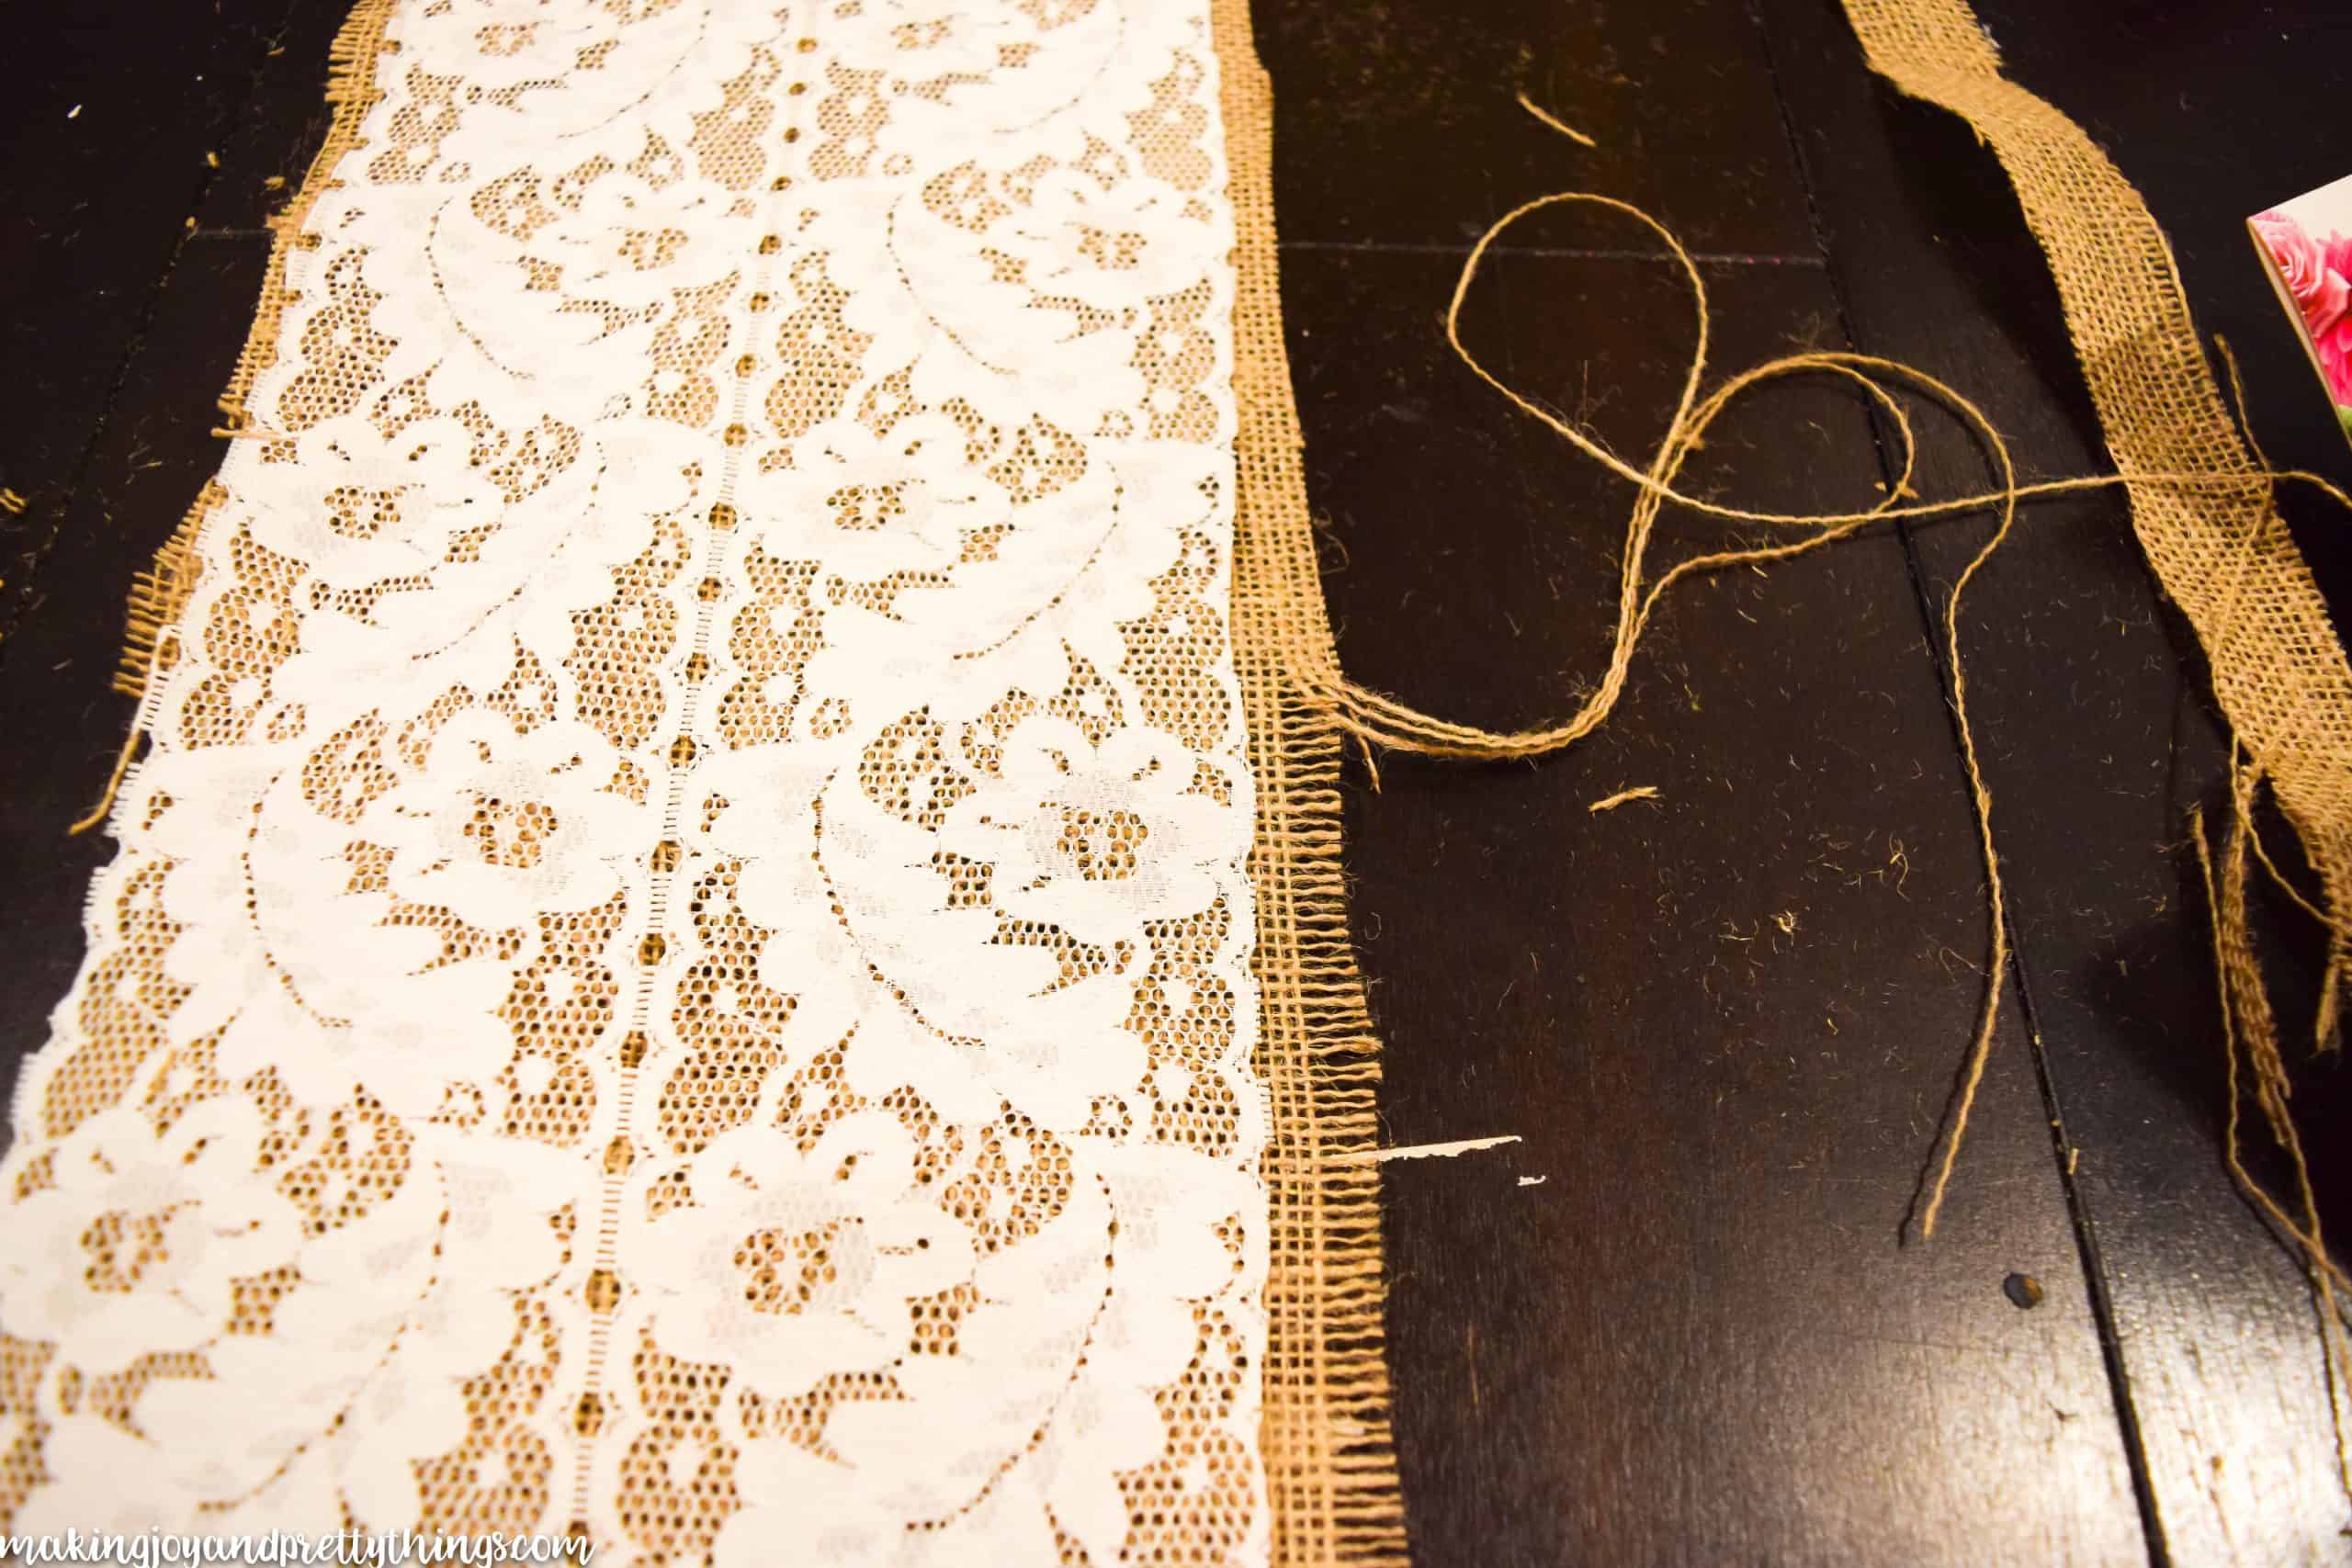 A look at the process of fraying the edges of the burlap table runner to give it a more rustic look. Strings of burlap fabric are pulled from the right side of the runner.